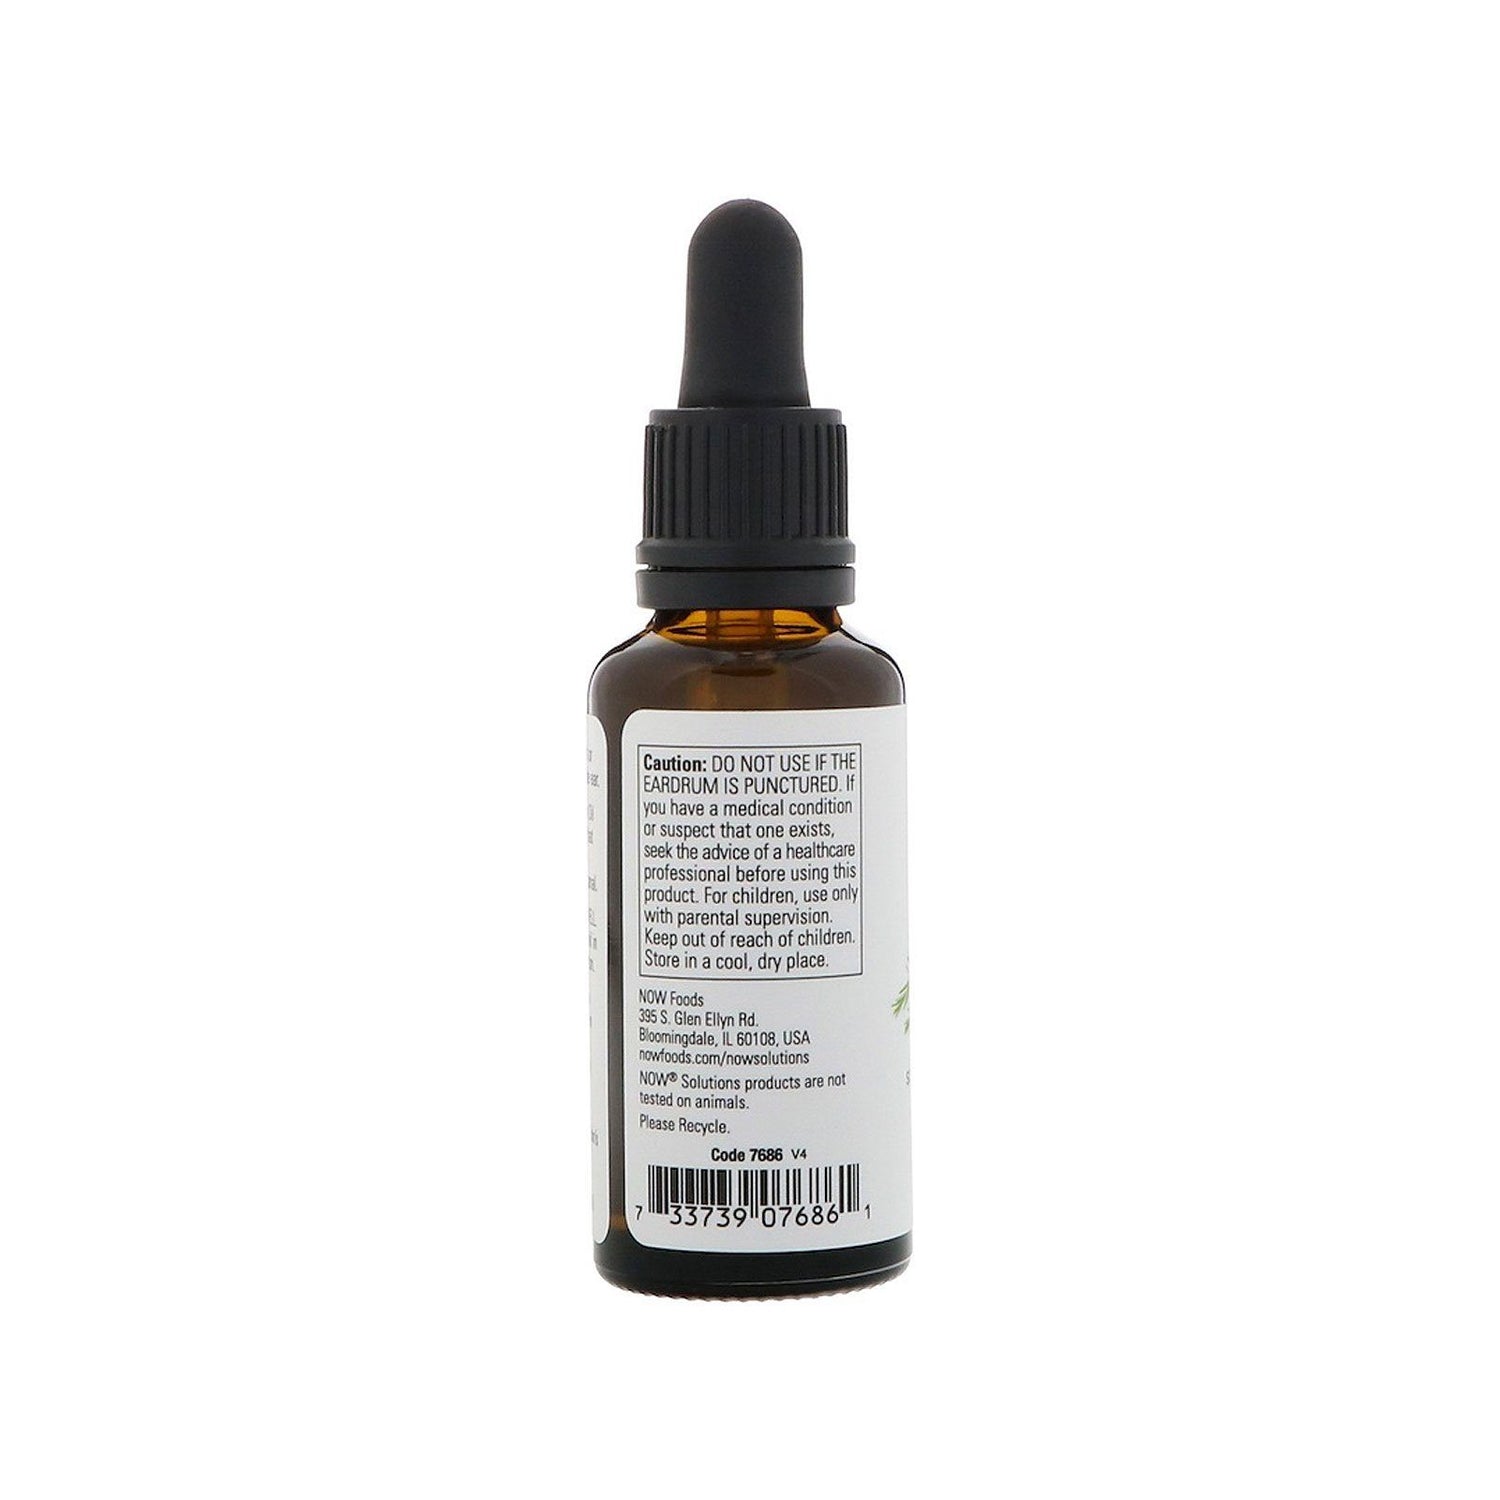 NOW Solutions, Ear Oil, Soothing Herbal Blend, Great on Mild Discomfort or Irritation, 1-Ounce (30 ml) - Bloom Concept